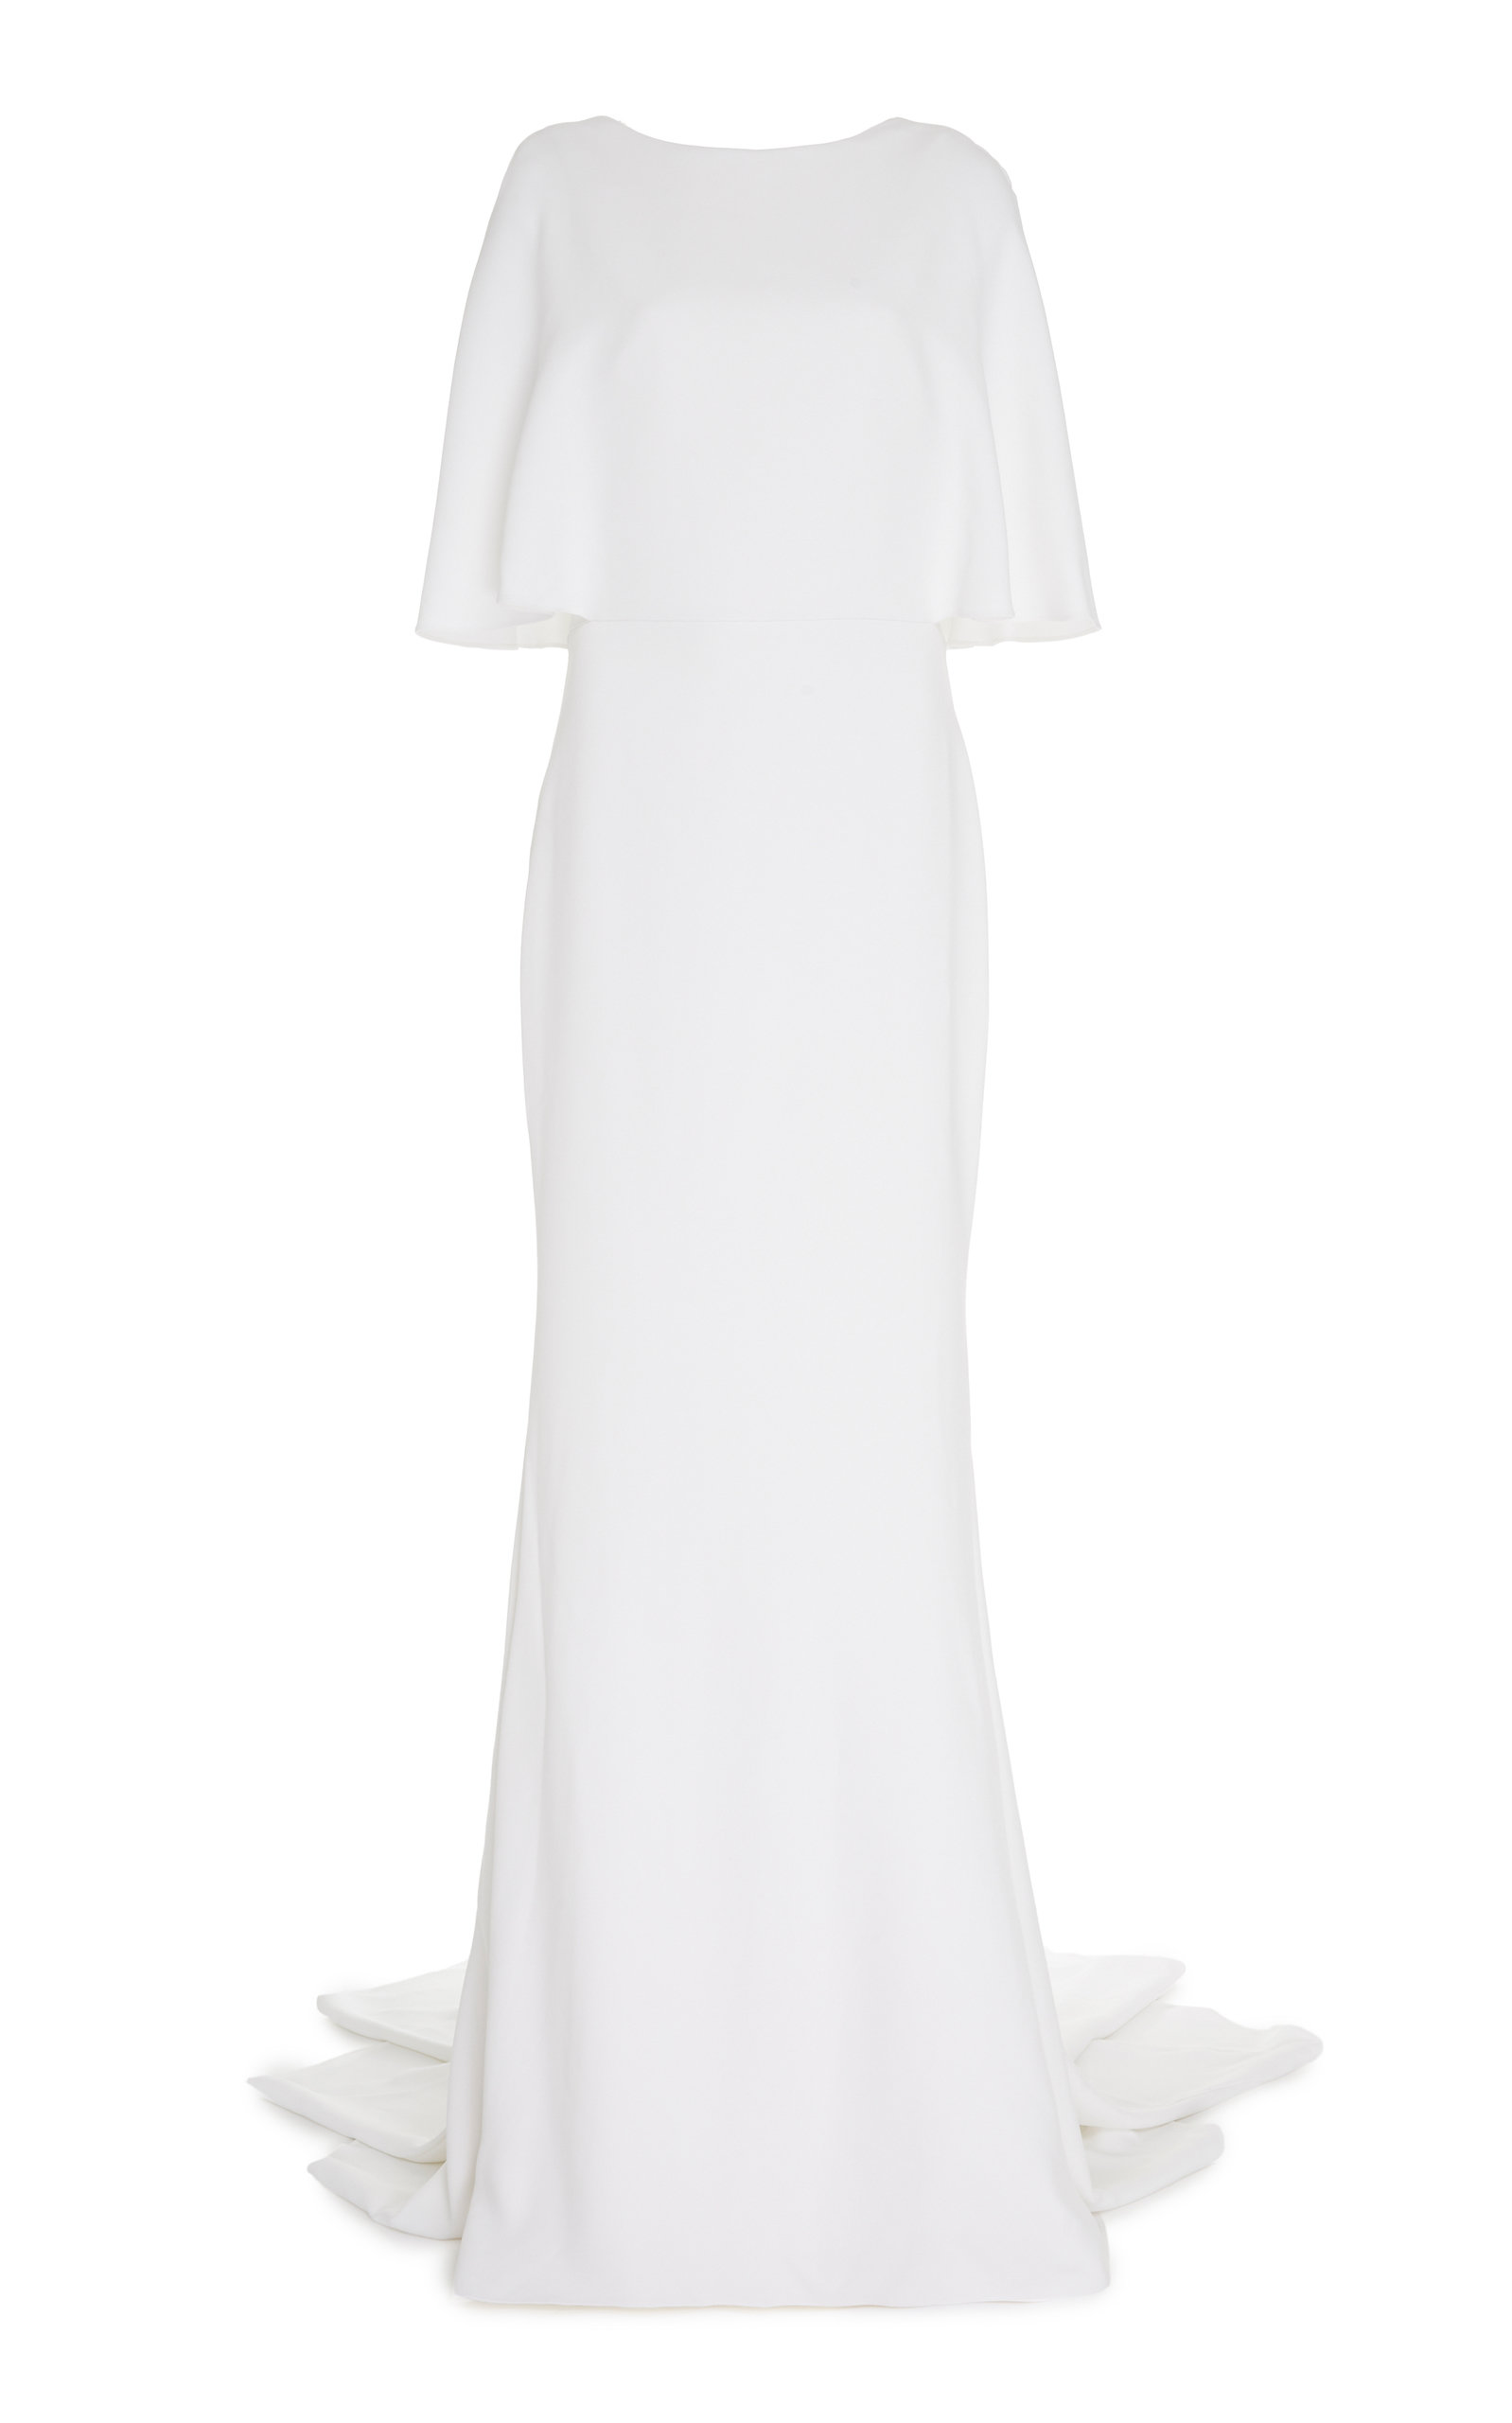 white crepe dress with cape sleeves